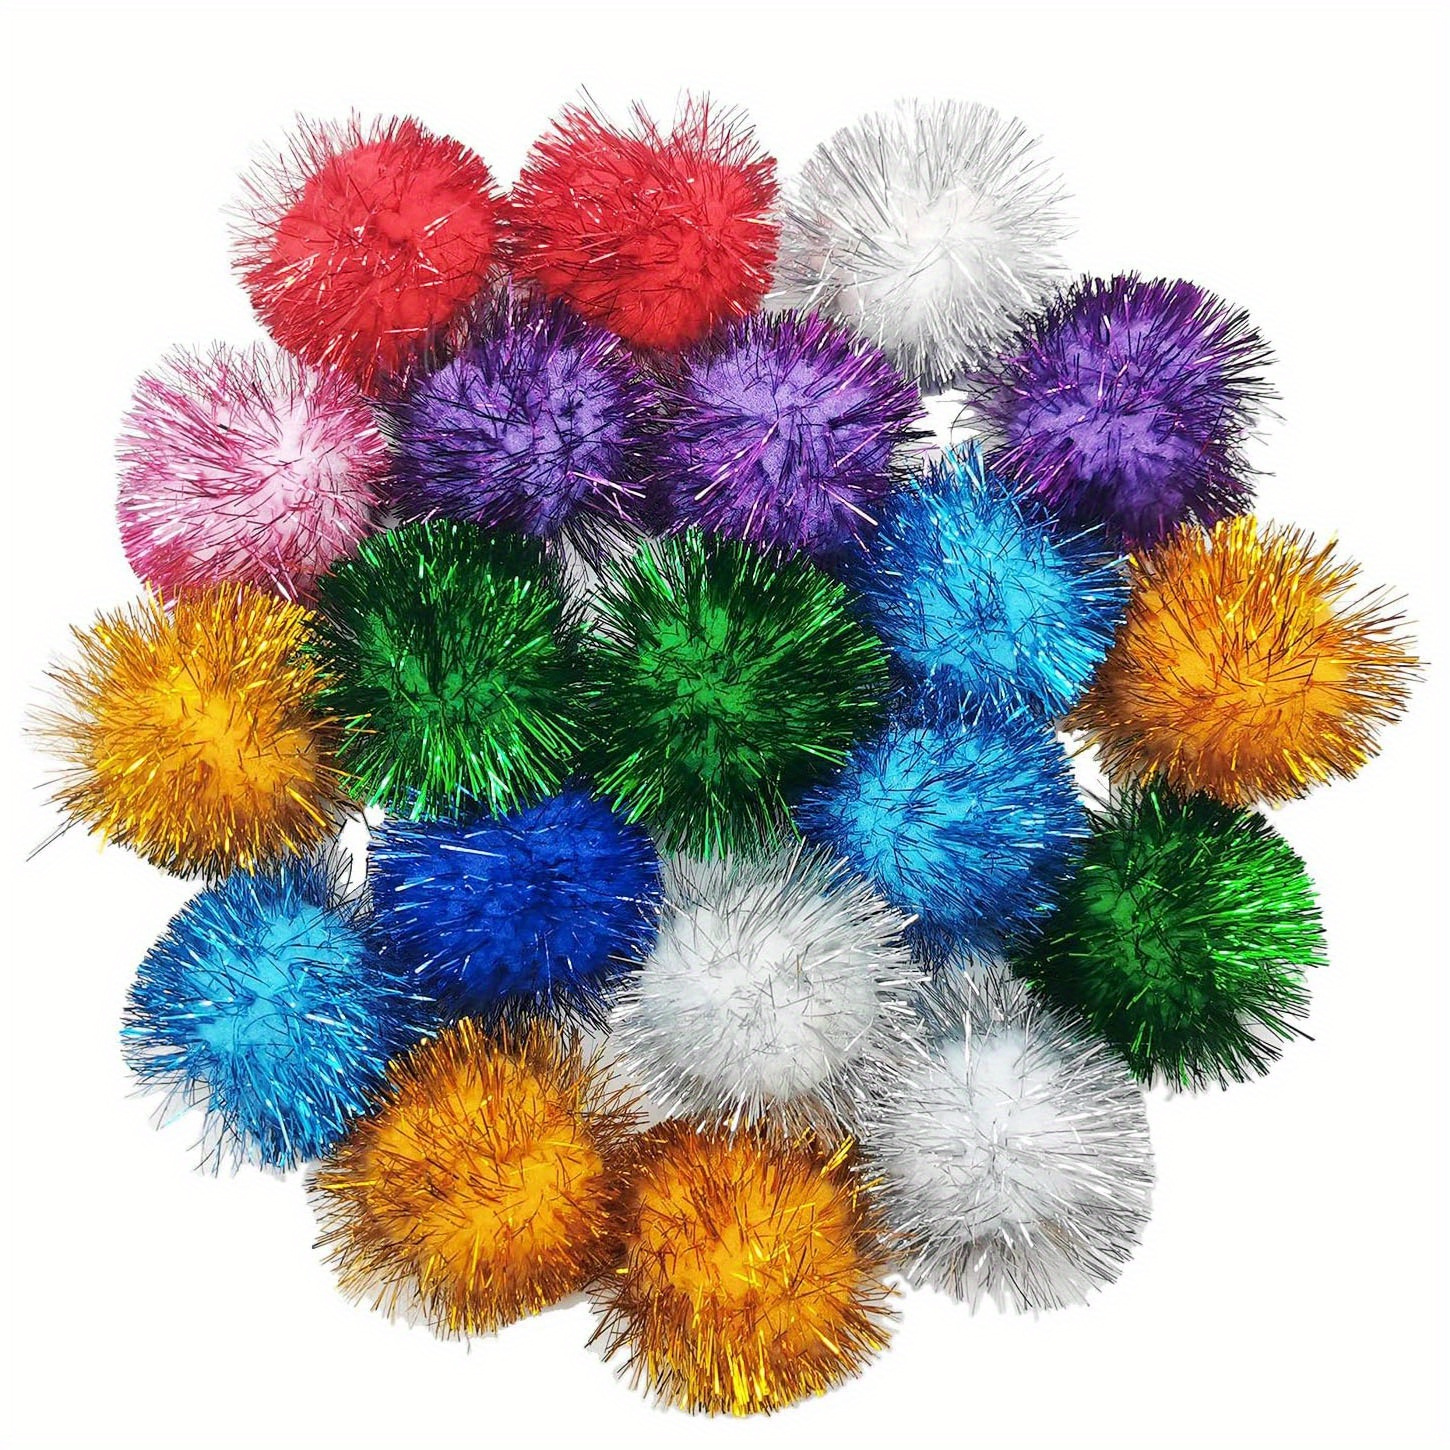 Glitter Pom Poms Bulk Saver - Art & Craft from Early Years Resources UK